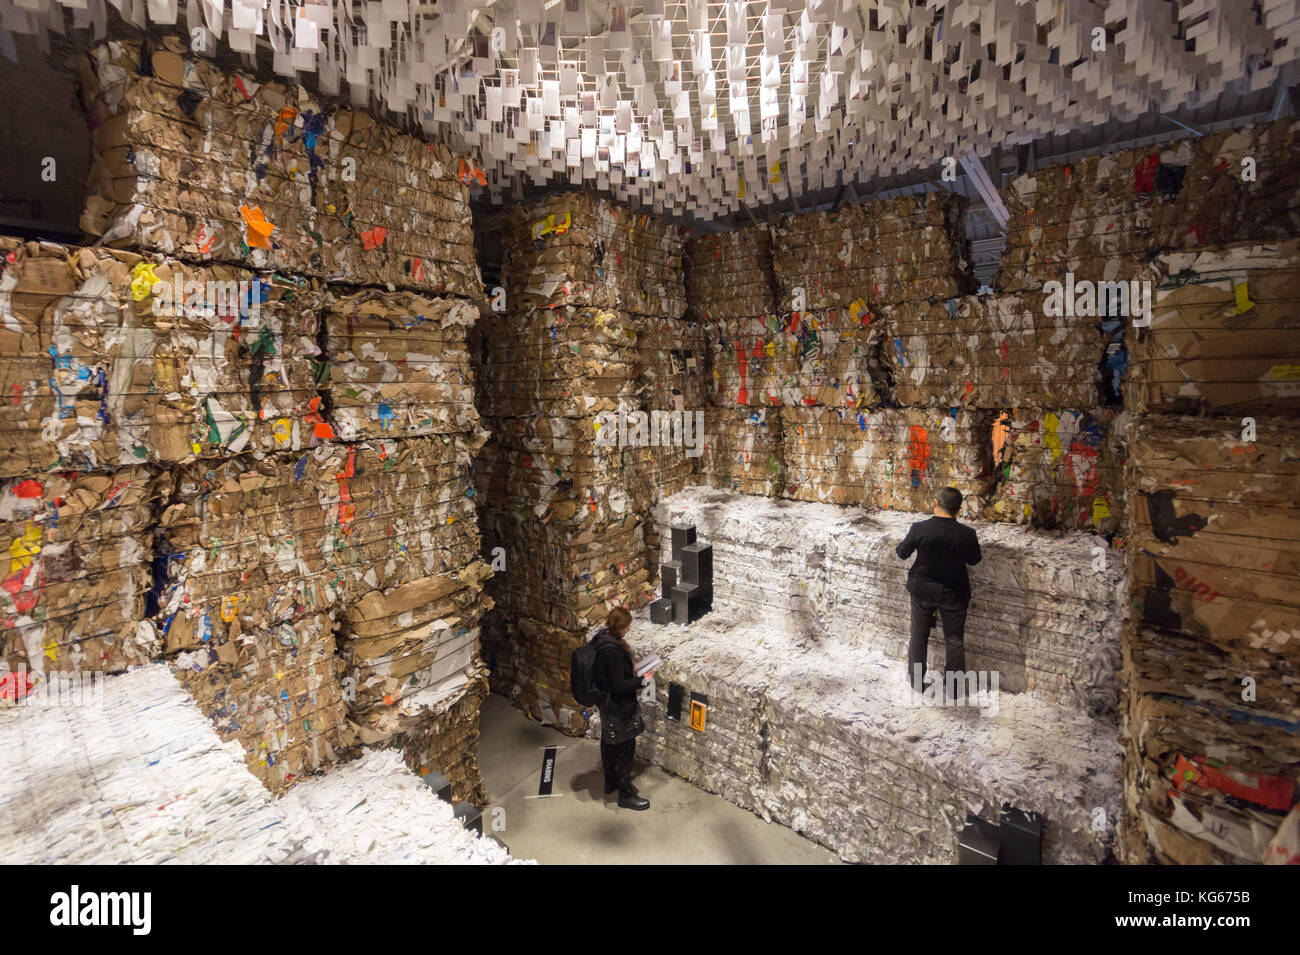 Made in recycled paper, the installation 'Forum' by the Rural Studio program - Auburn University for 'Architecture as Art' exhibition, Milan, 2016 Stock Photo